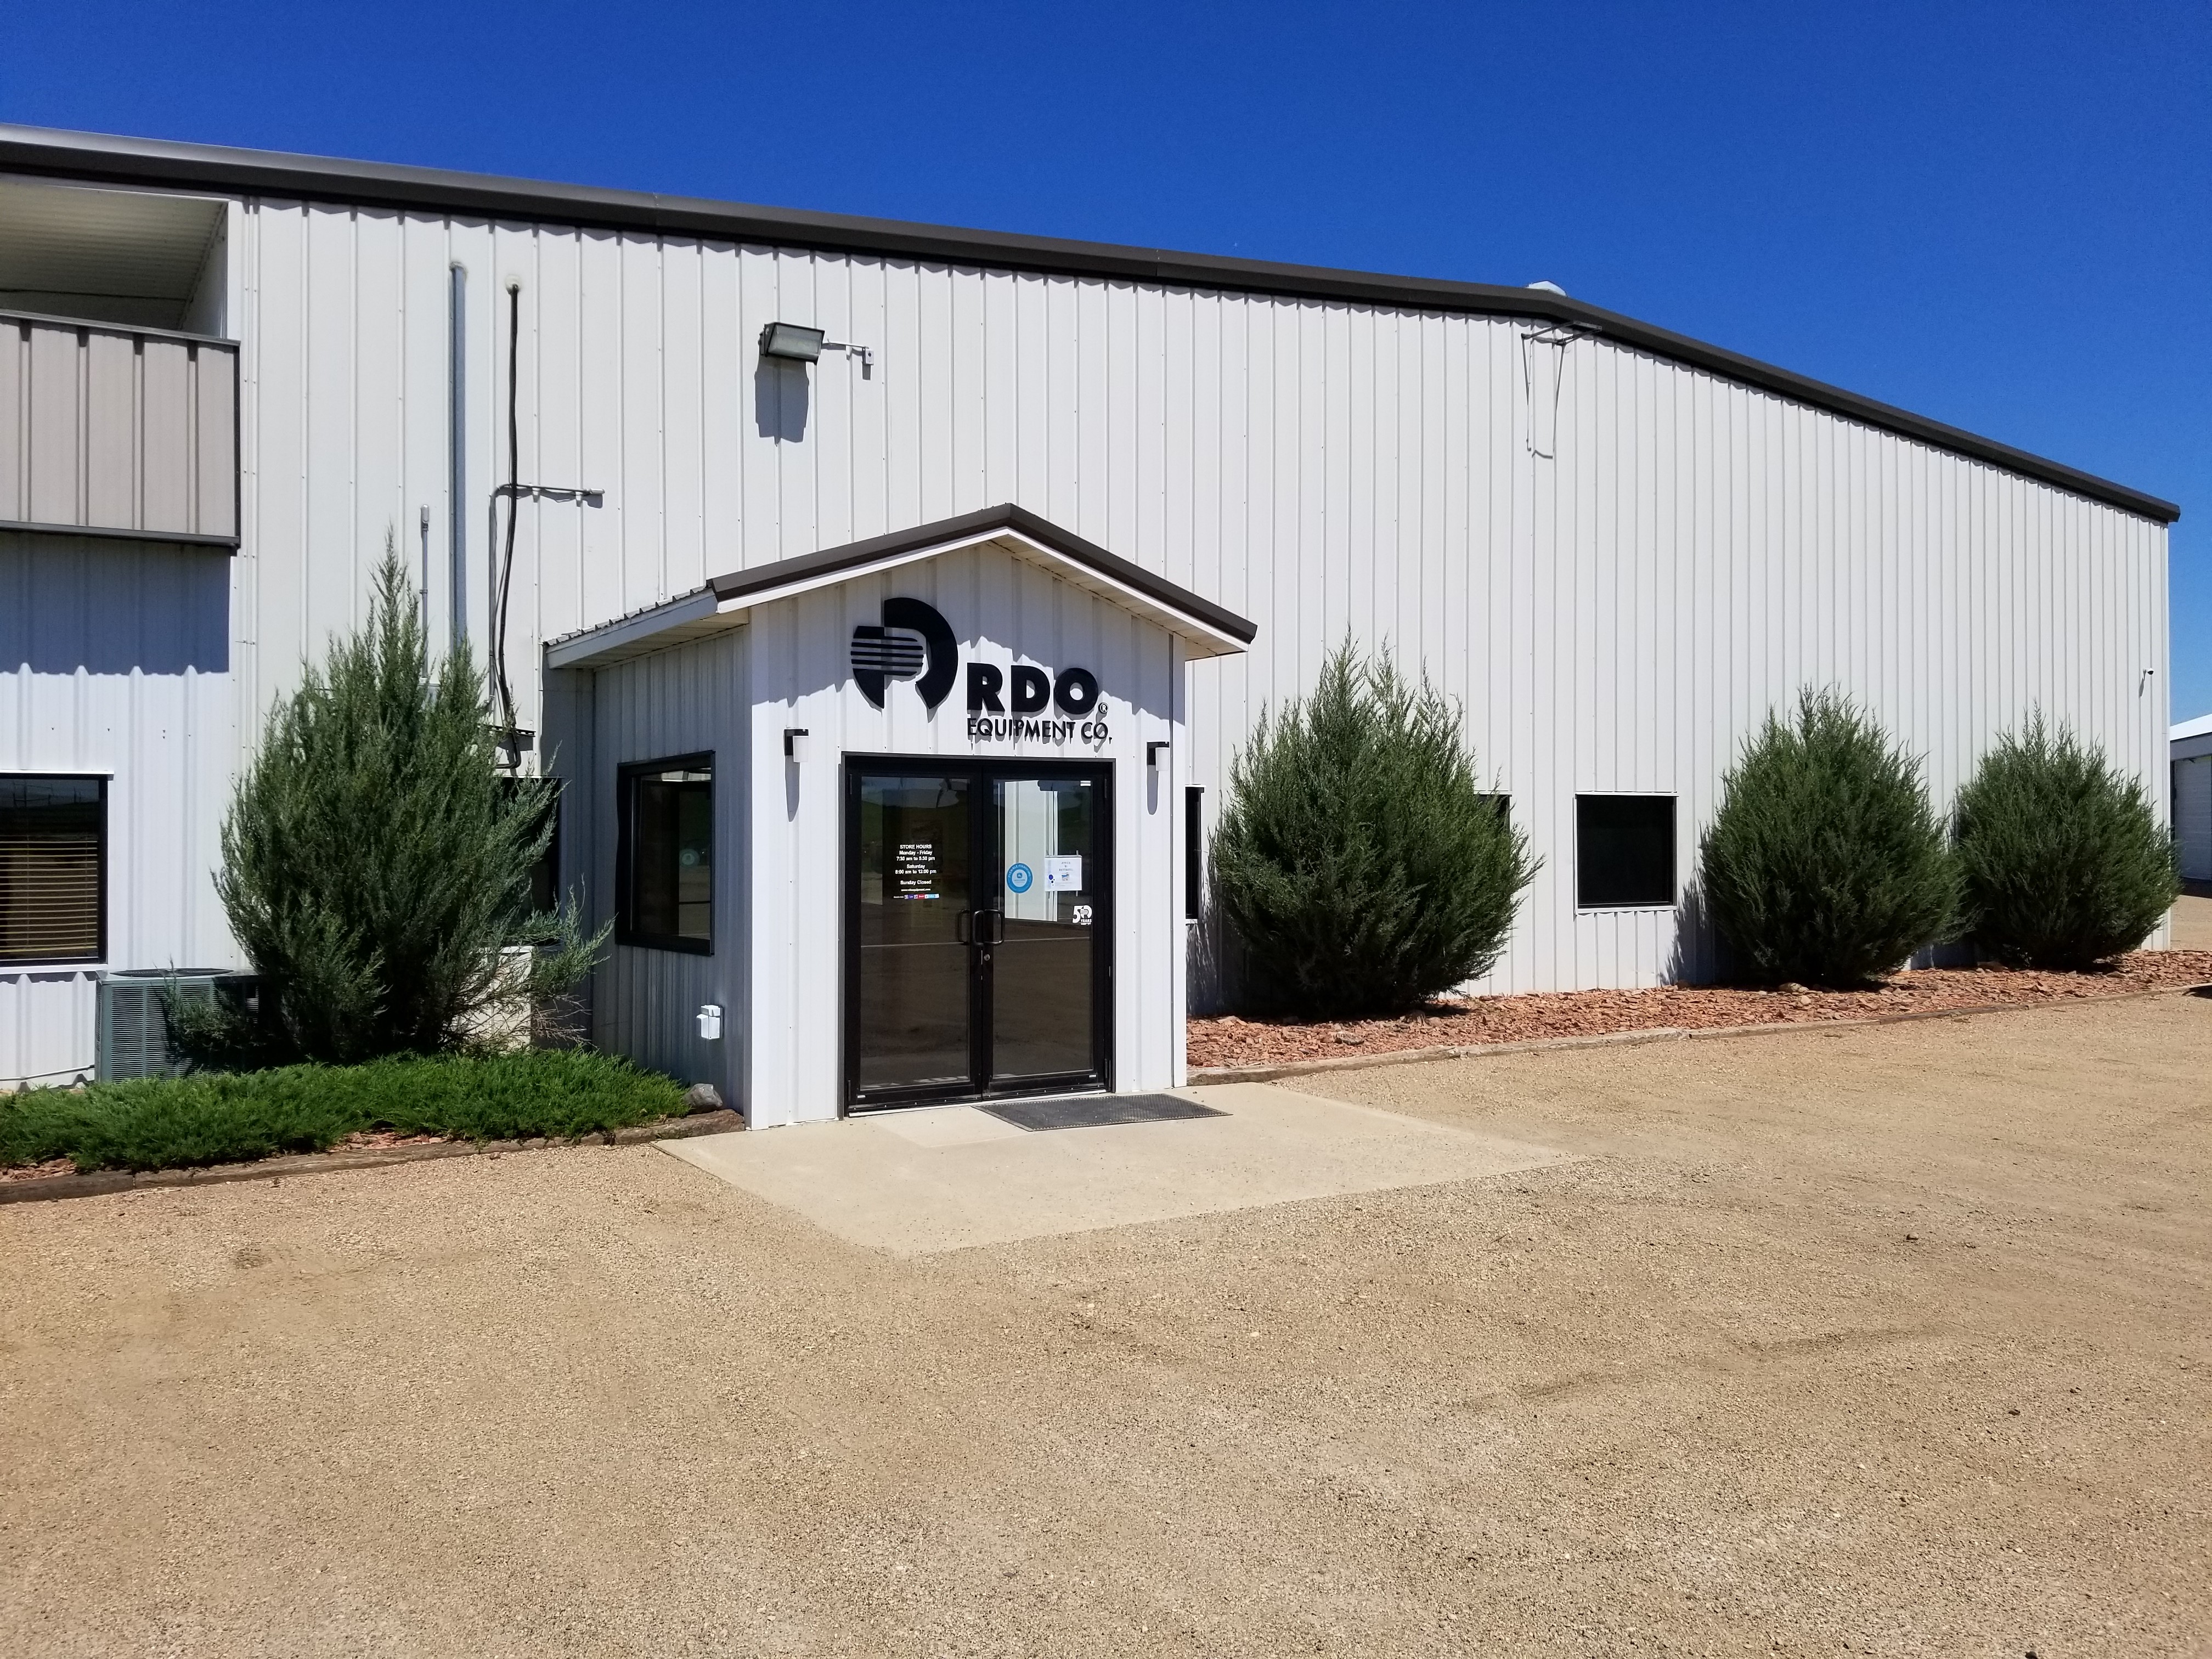 Store Entrance at RDO Equipment Co. in Lisbon, ND